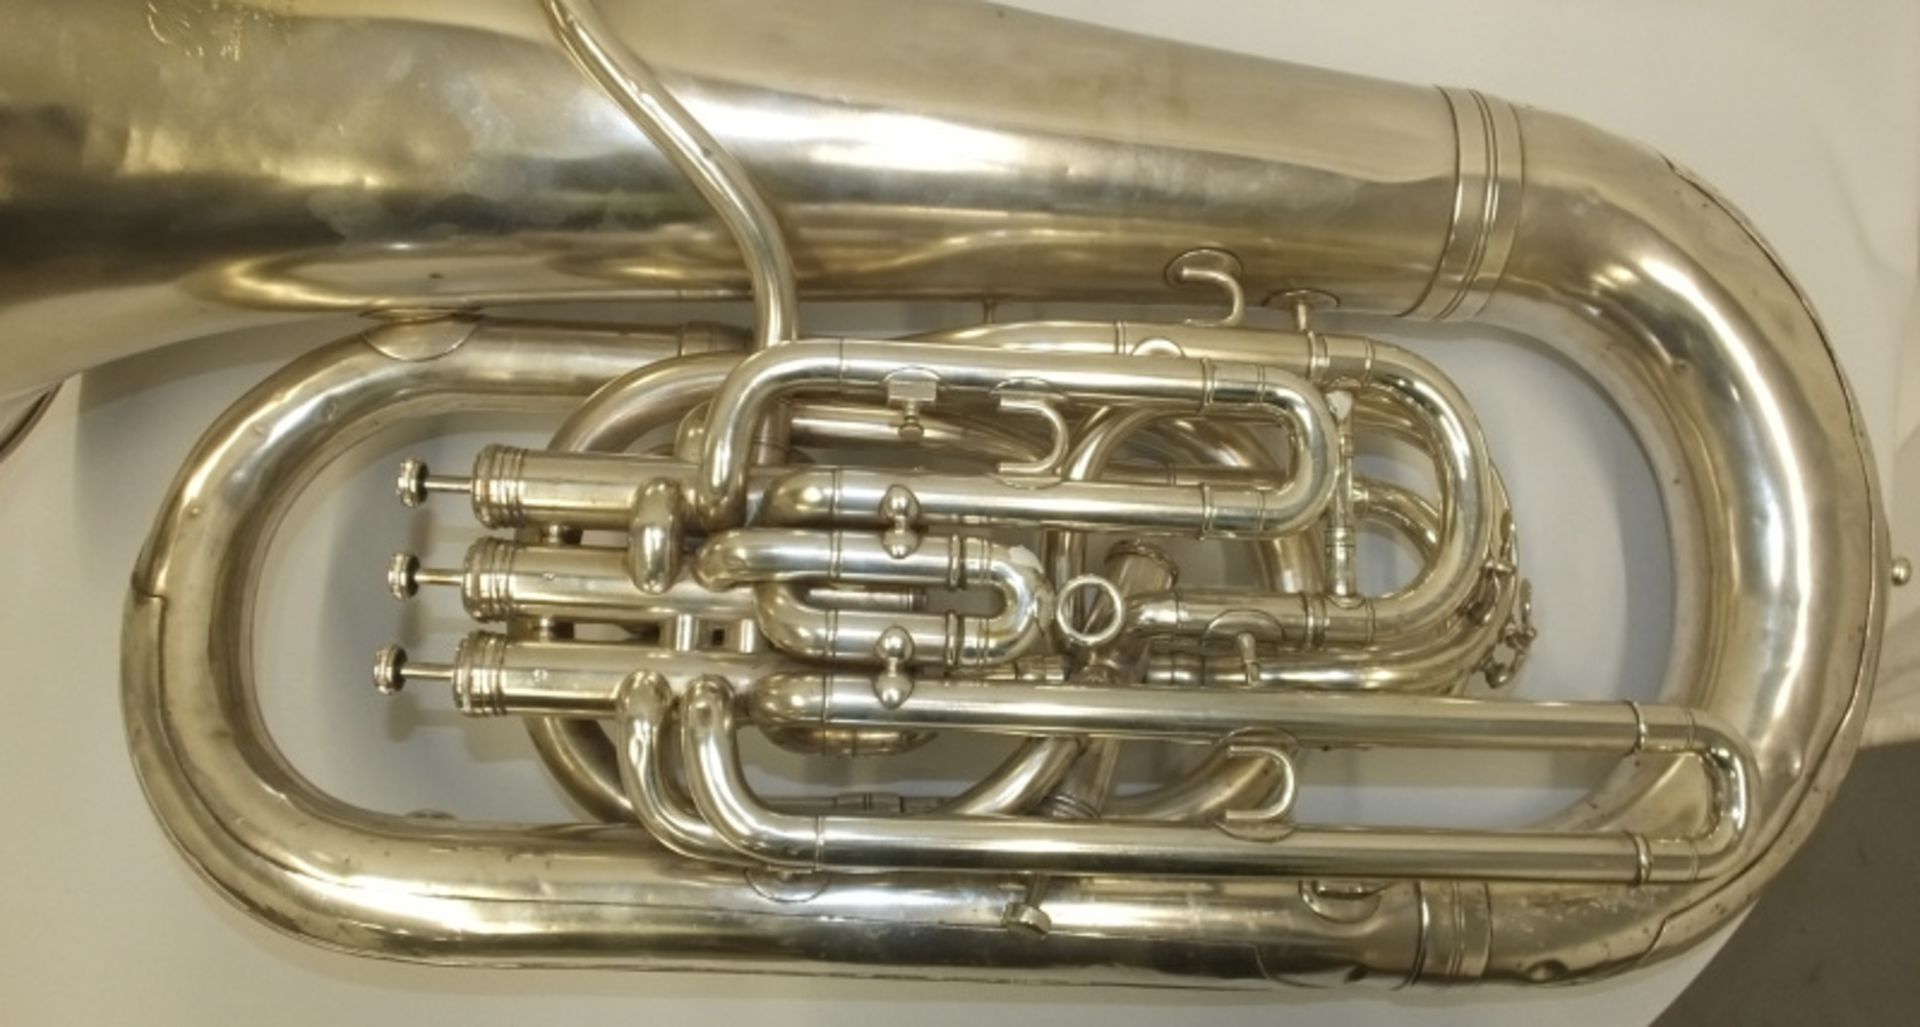 Boosey & Hawkes Imperial Tuba in case - Serial number 352762 - Please check photos carefully - Image 4 of 19